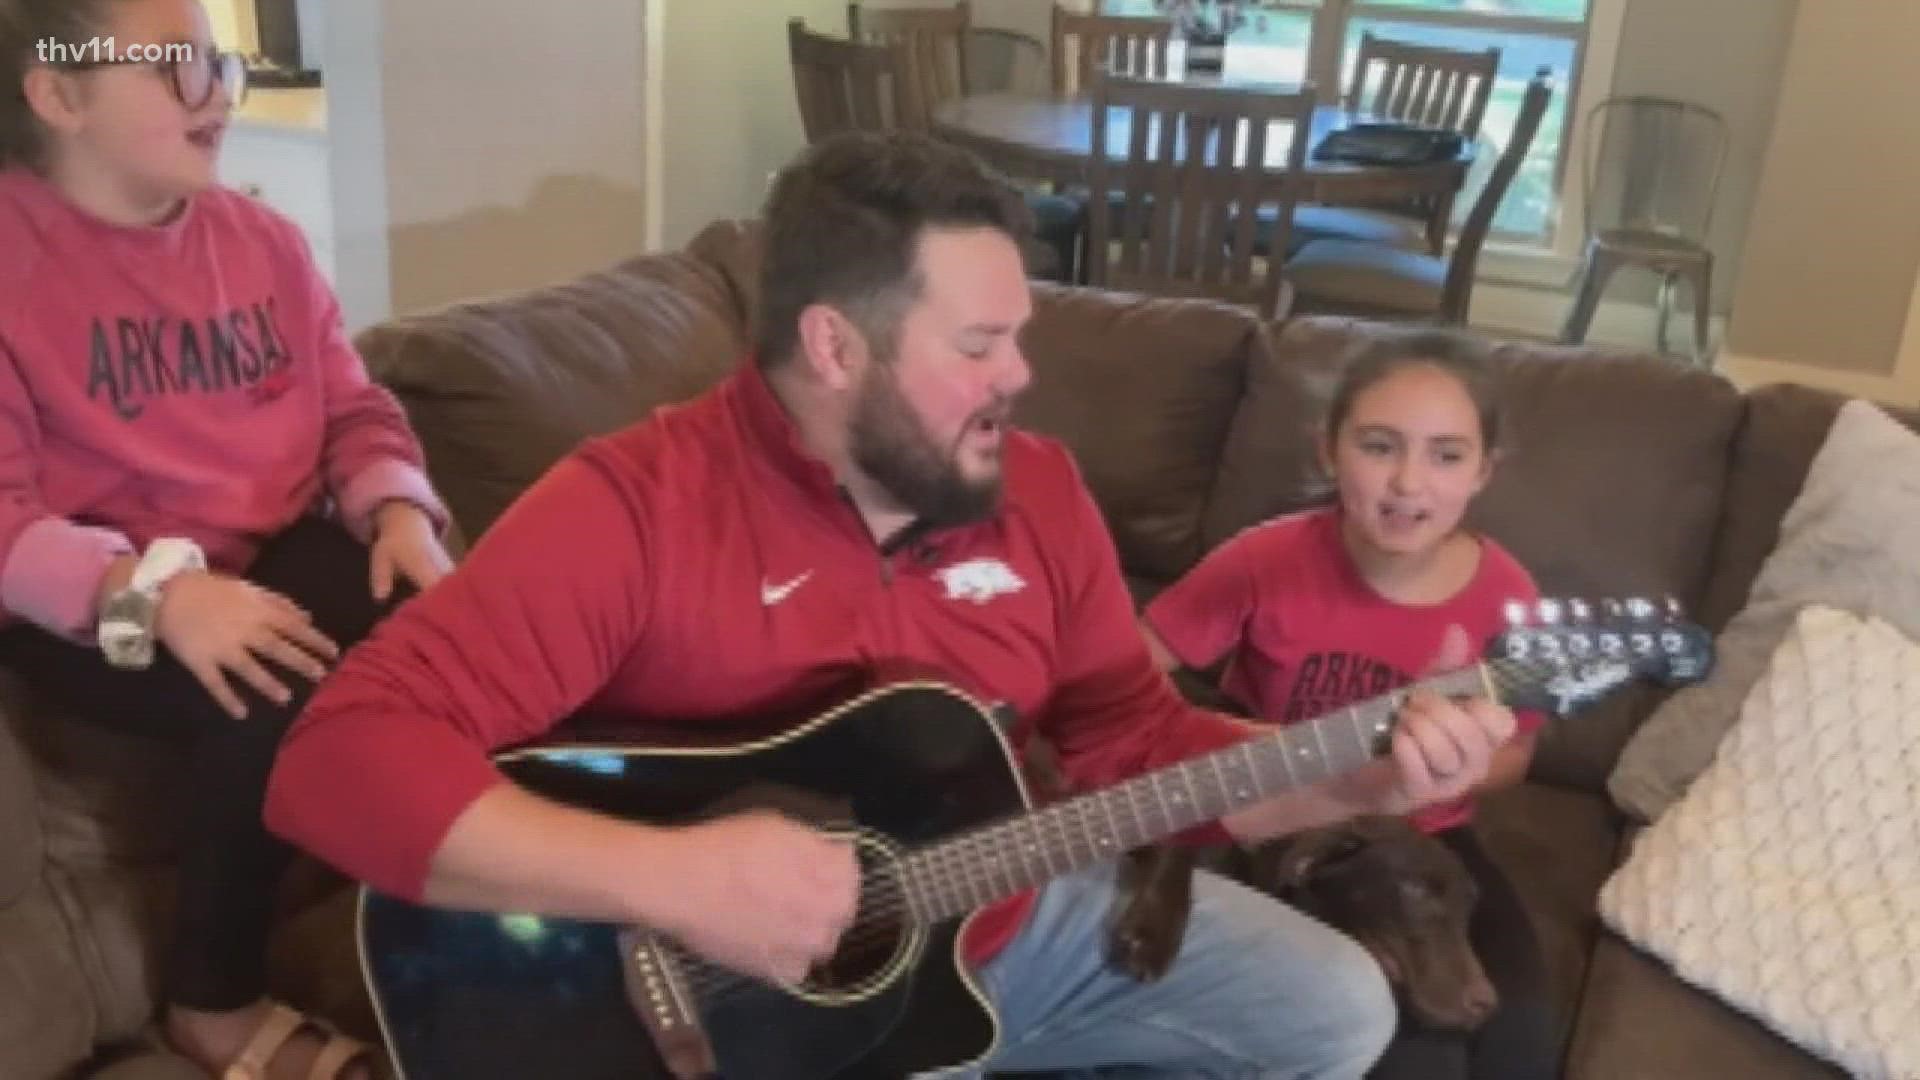 Ultimate Hog fan writes song to inspire team